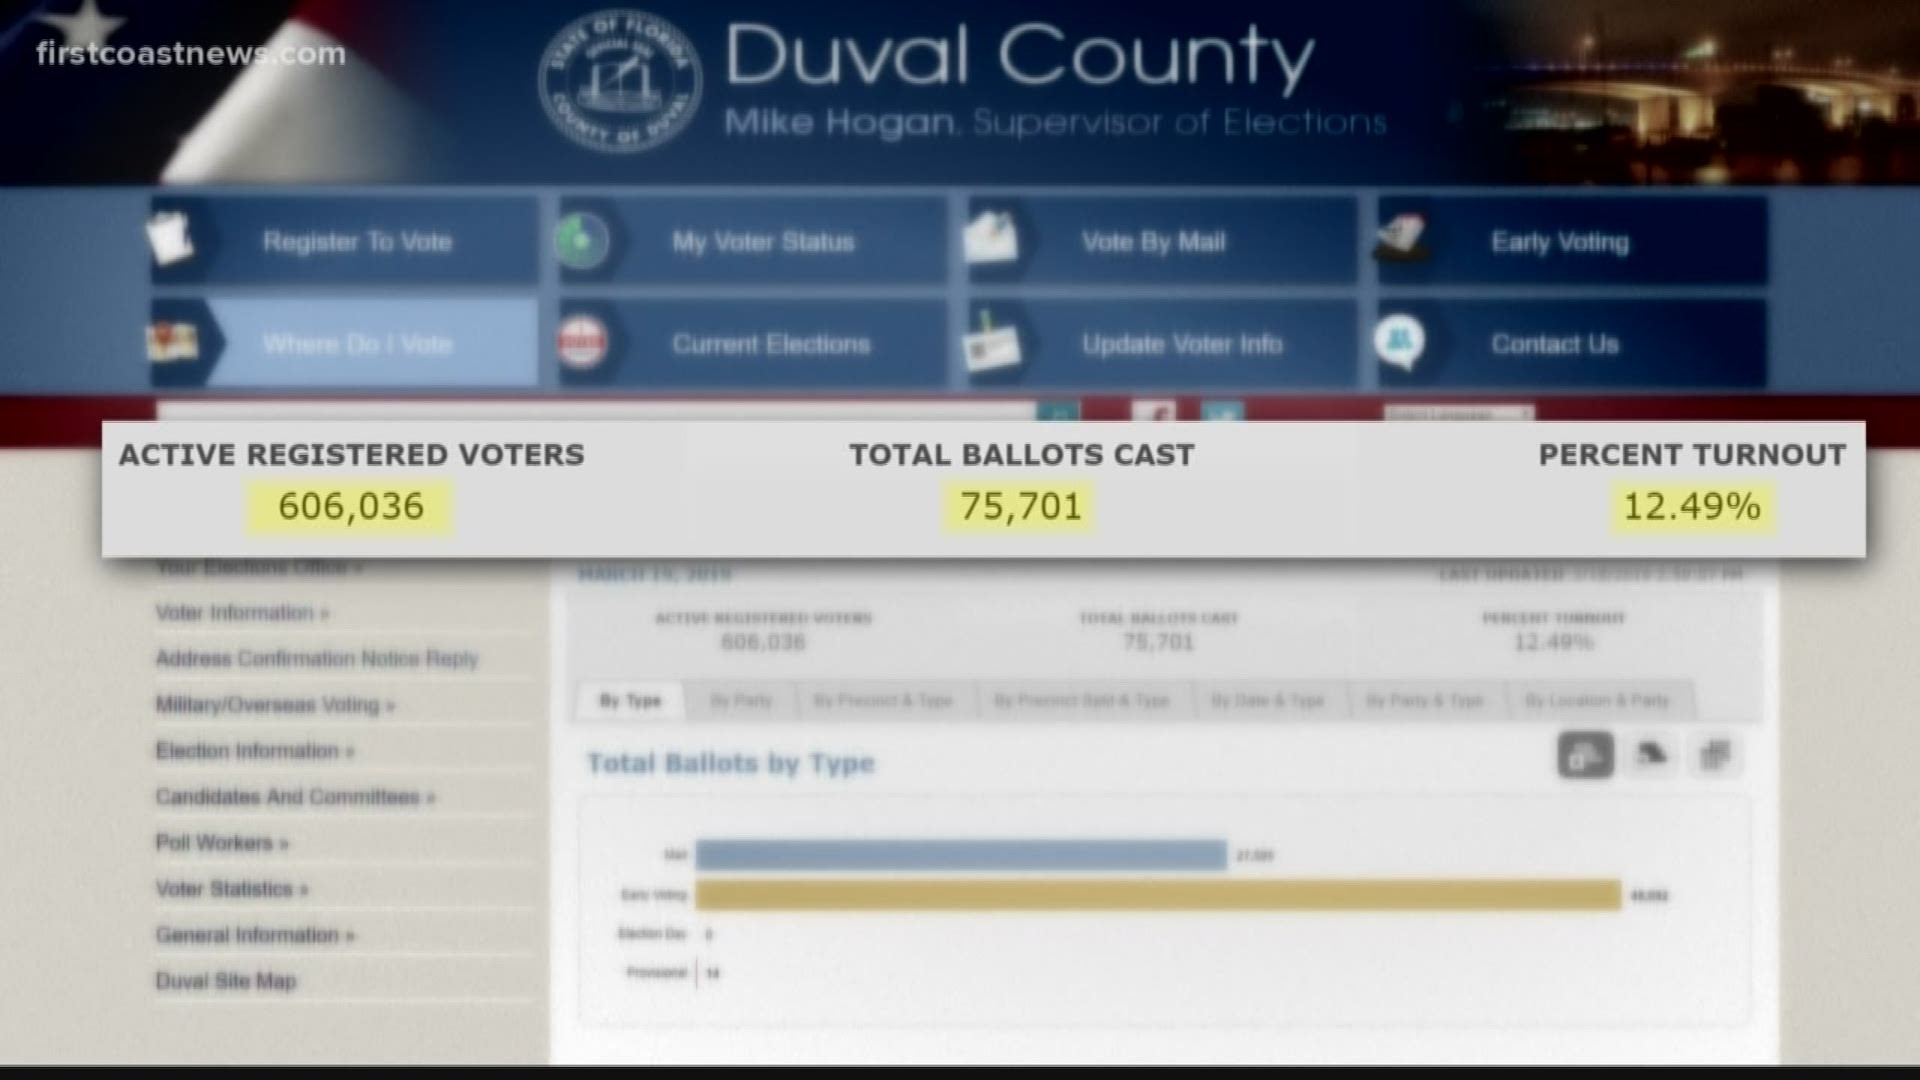 It's Election Day for Duval County voters. They will decide leadership for the next four years. This video shows who is running and the voter turnout so far.